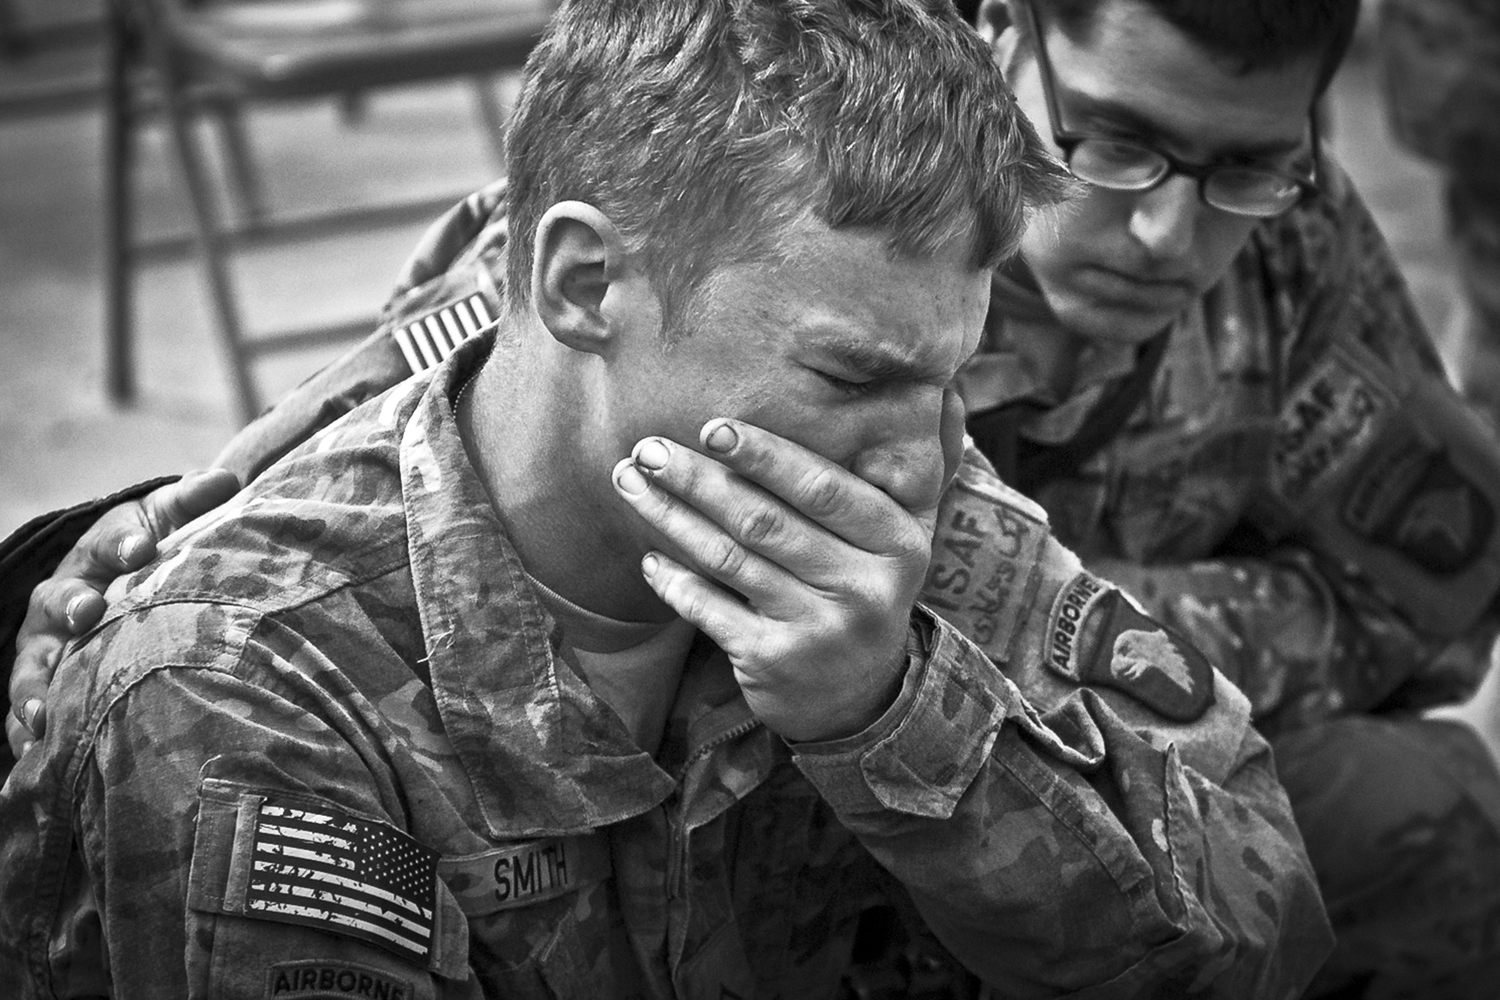 LossThird Place, News. U.S. Army Soldiers assigned to Company C, 2nd Battalion, 327th Infantry Regiment, Task Force No Slack, 1st Brigade Combat Team, 101st Airborne Division, say farewell to fallen comrades during a memorial service for six fallen soldiers at Forward Operating Base Joyce in eastern Afghanistan's Kunar Province. Six troops were killed on the battlefield during combat operations a few weeks before. April 9, 2011.